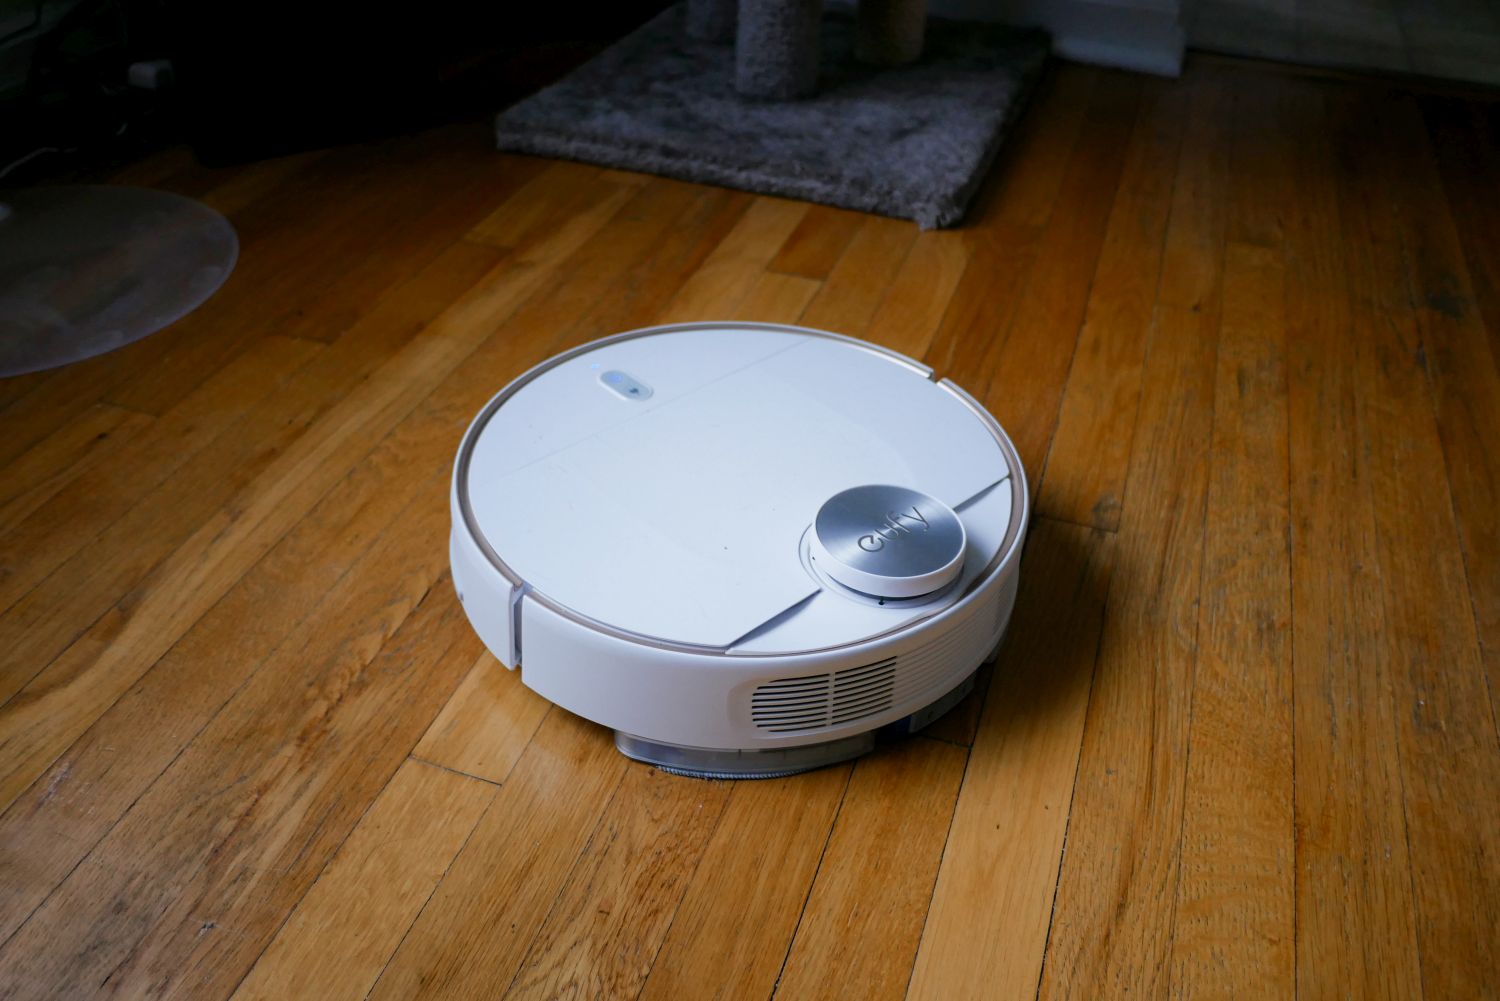 Eufy RoboVac L70 Hybrid Robot Vacuum Review: Do All The Things